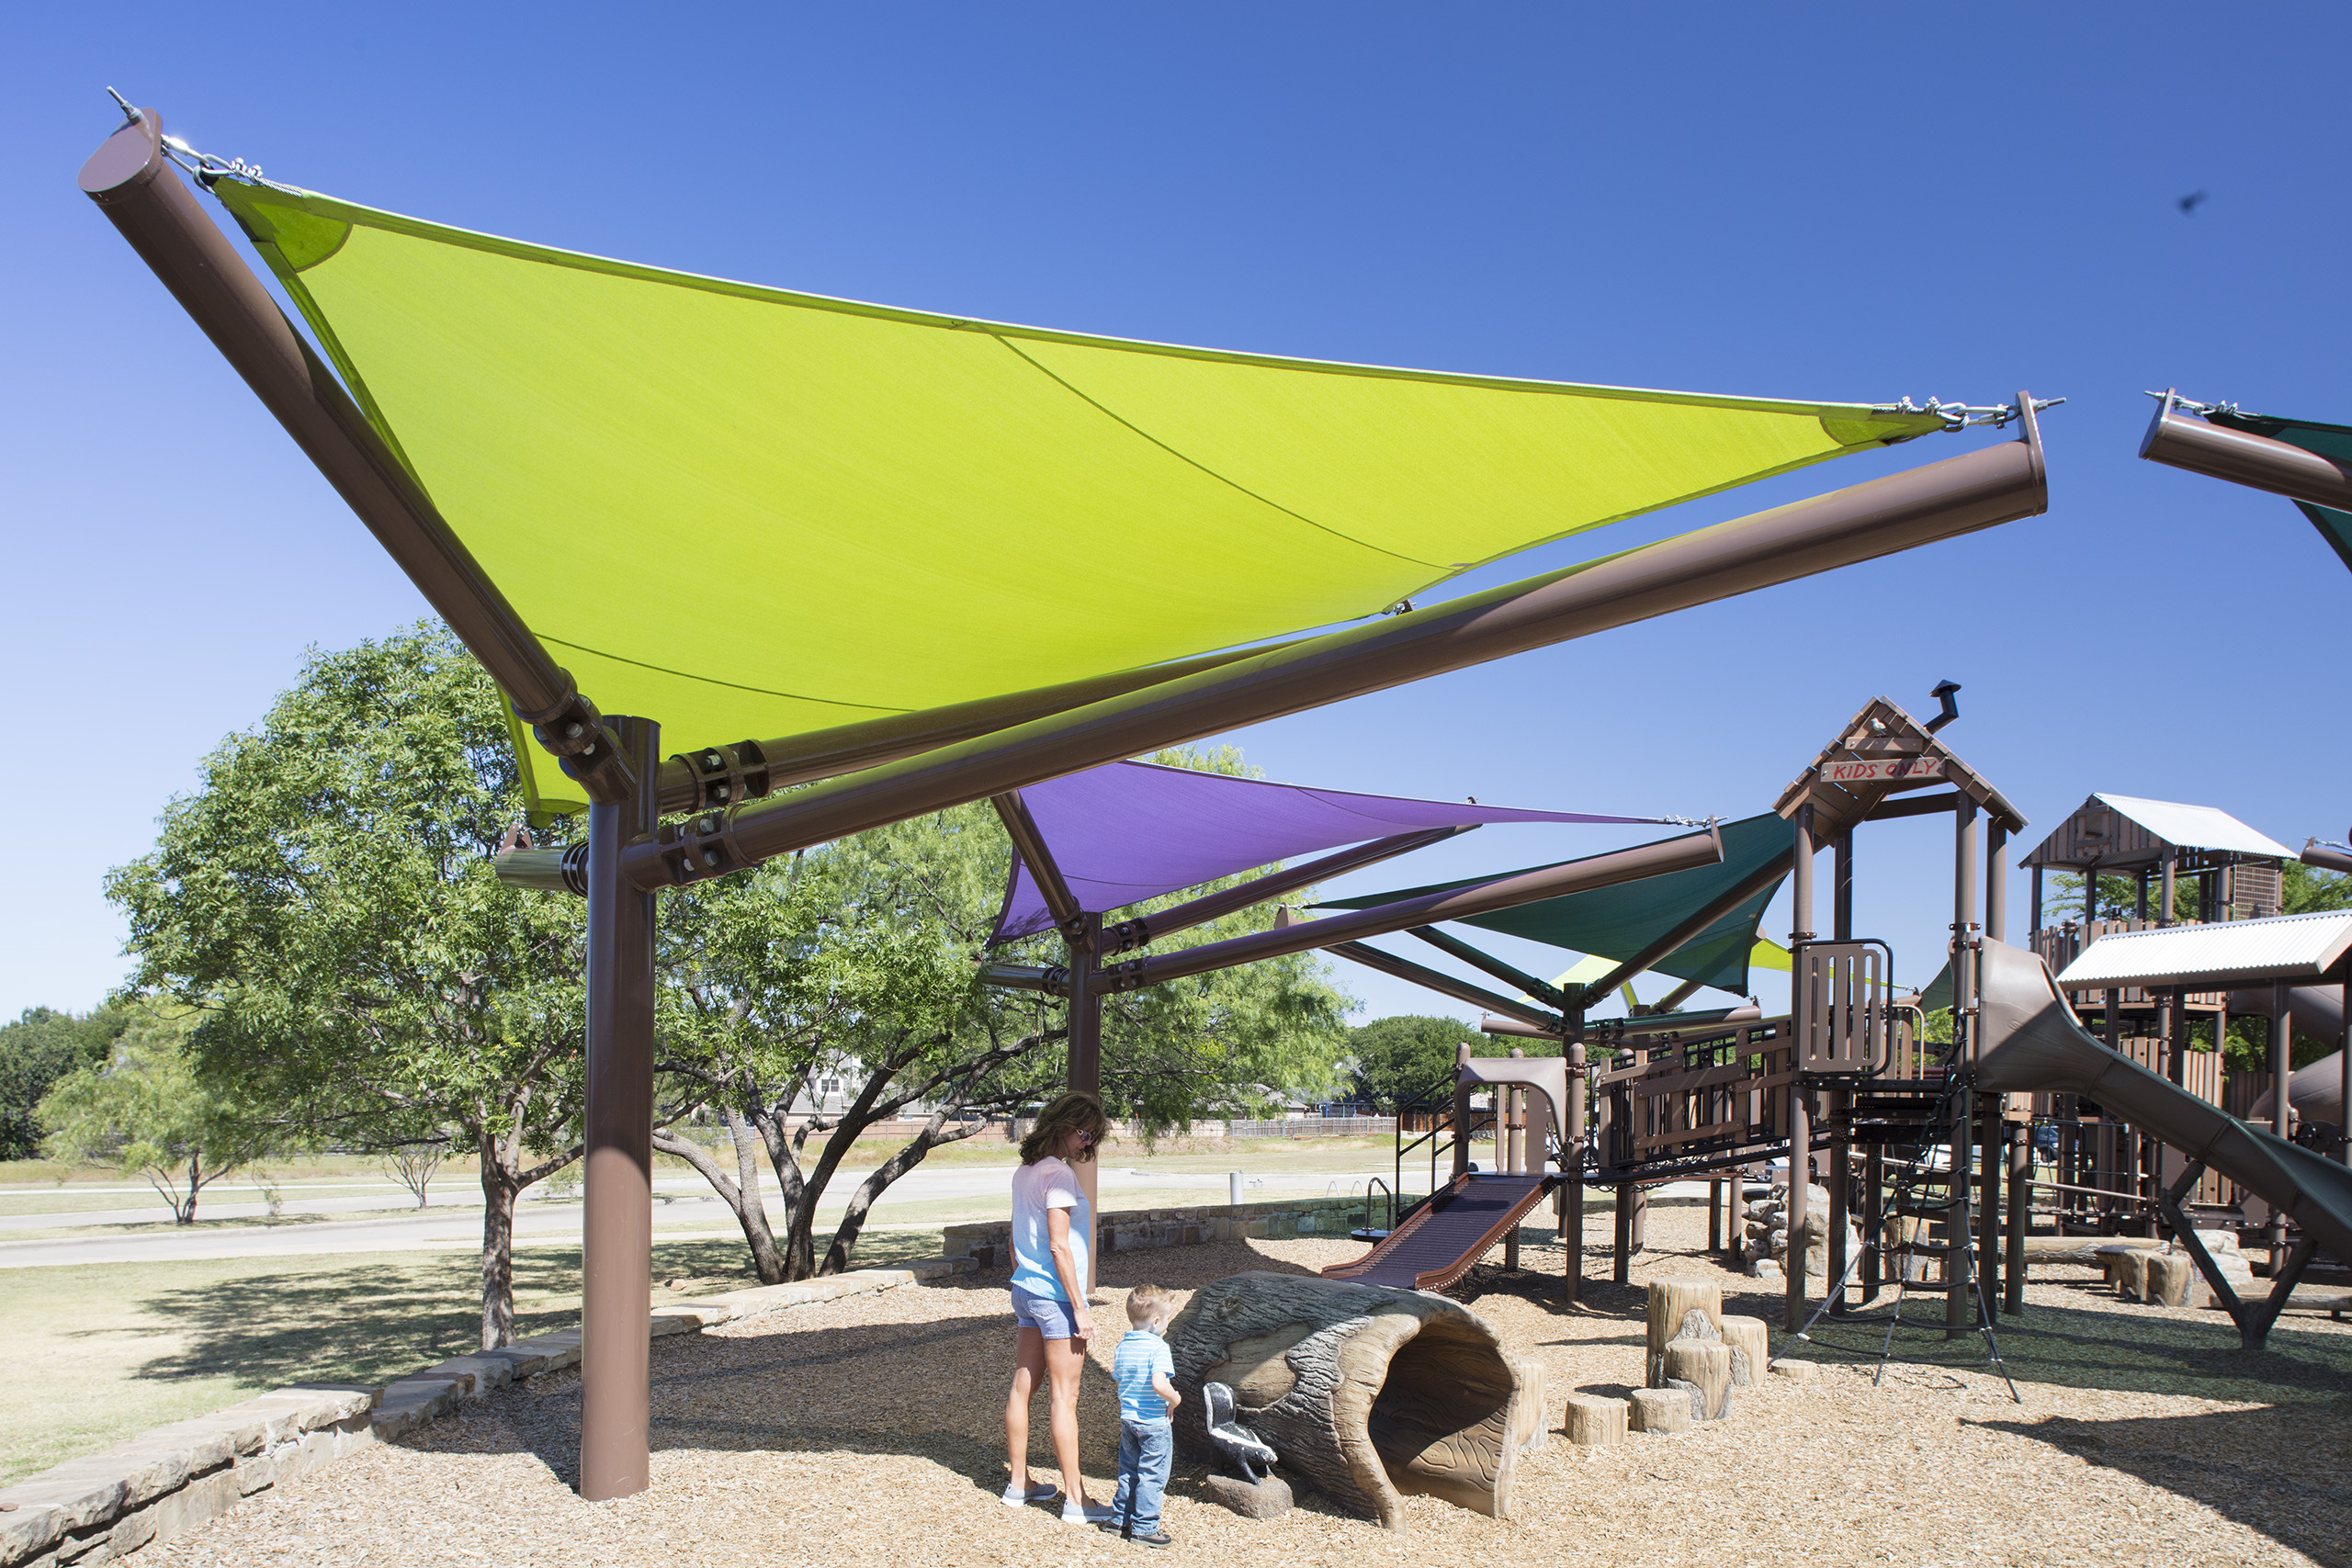 large triangle shade covering adult and child from sun